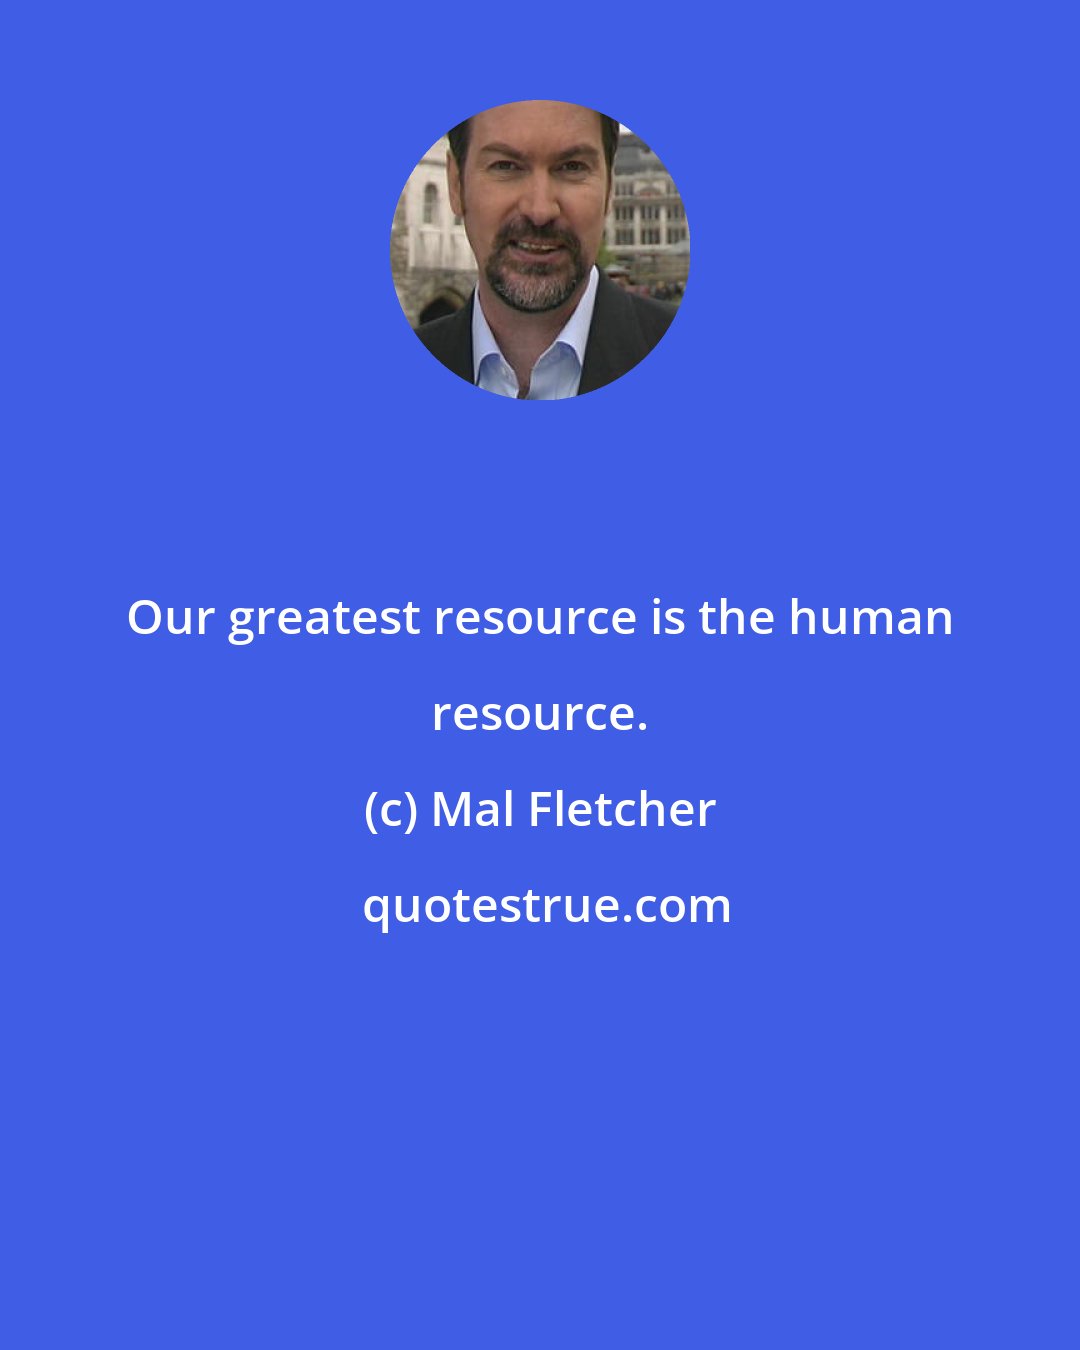 Mal Fletcher: Our greatest resource is the human resource.